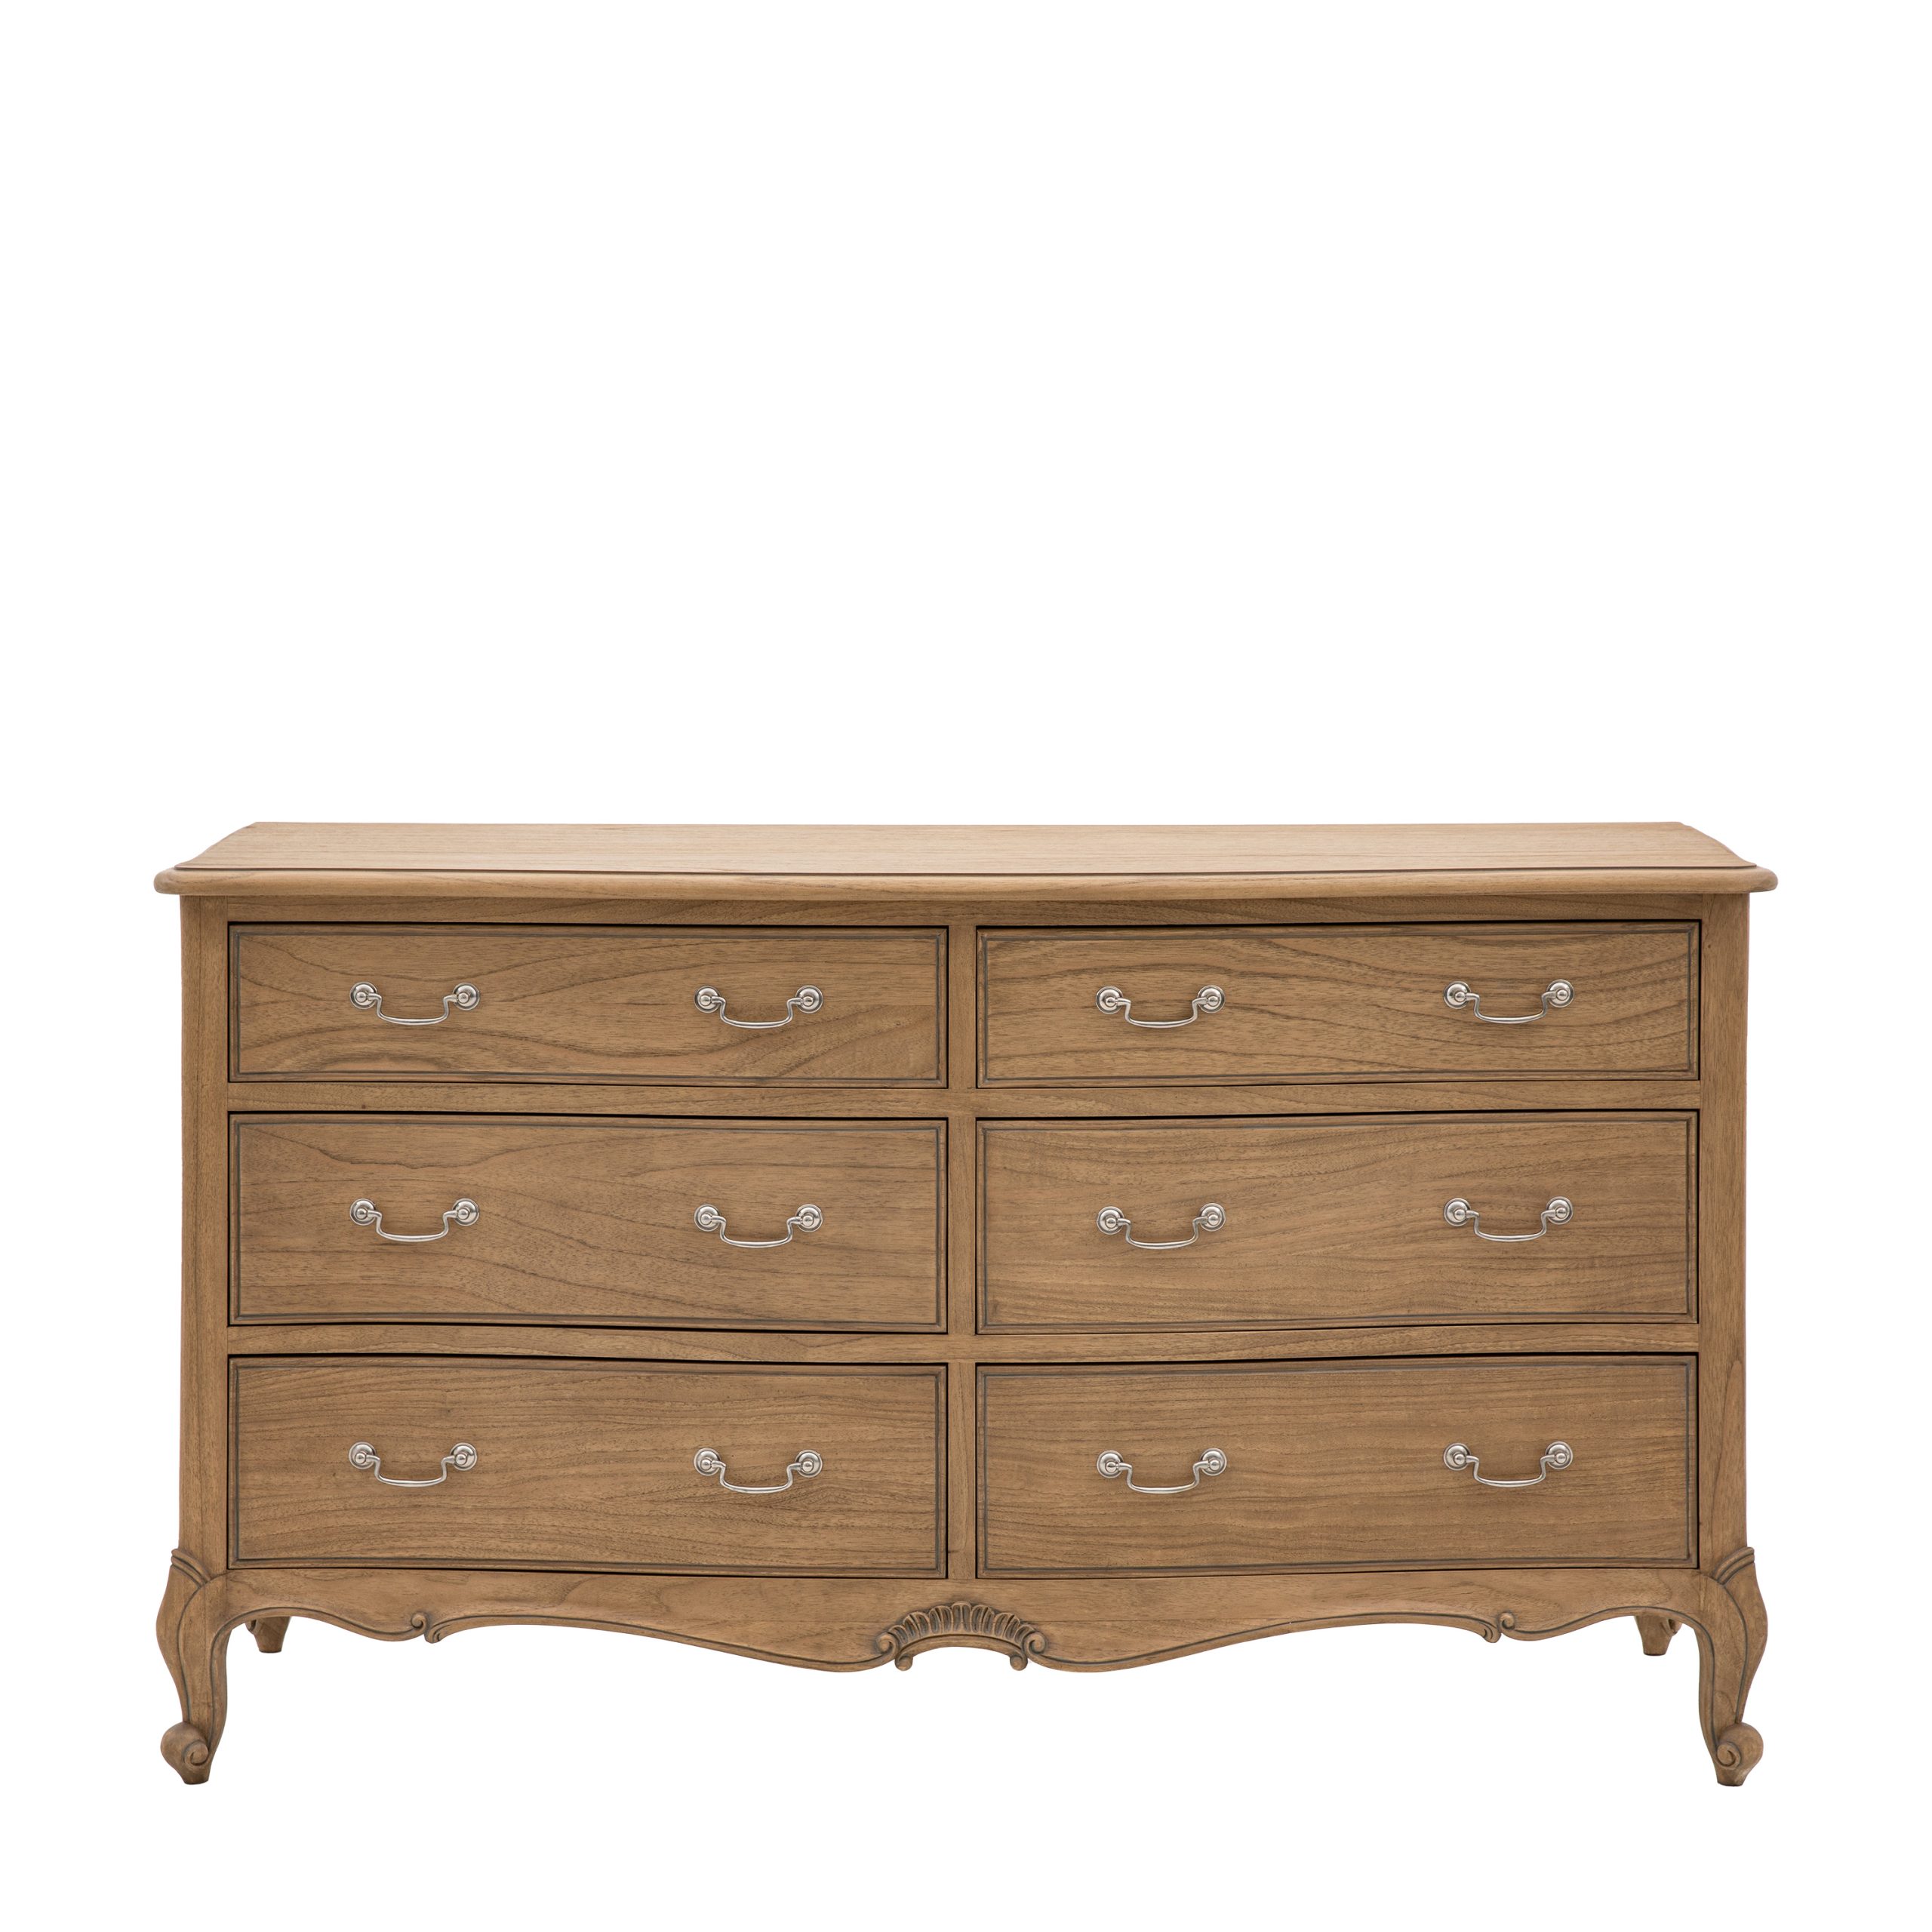 Gallery Direct Chic 6 Drawer Chest Weathered